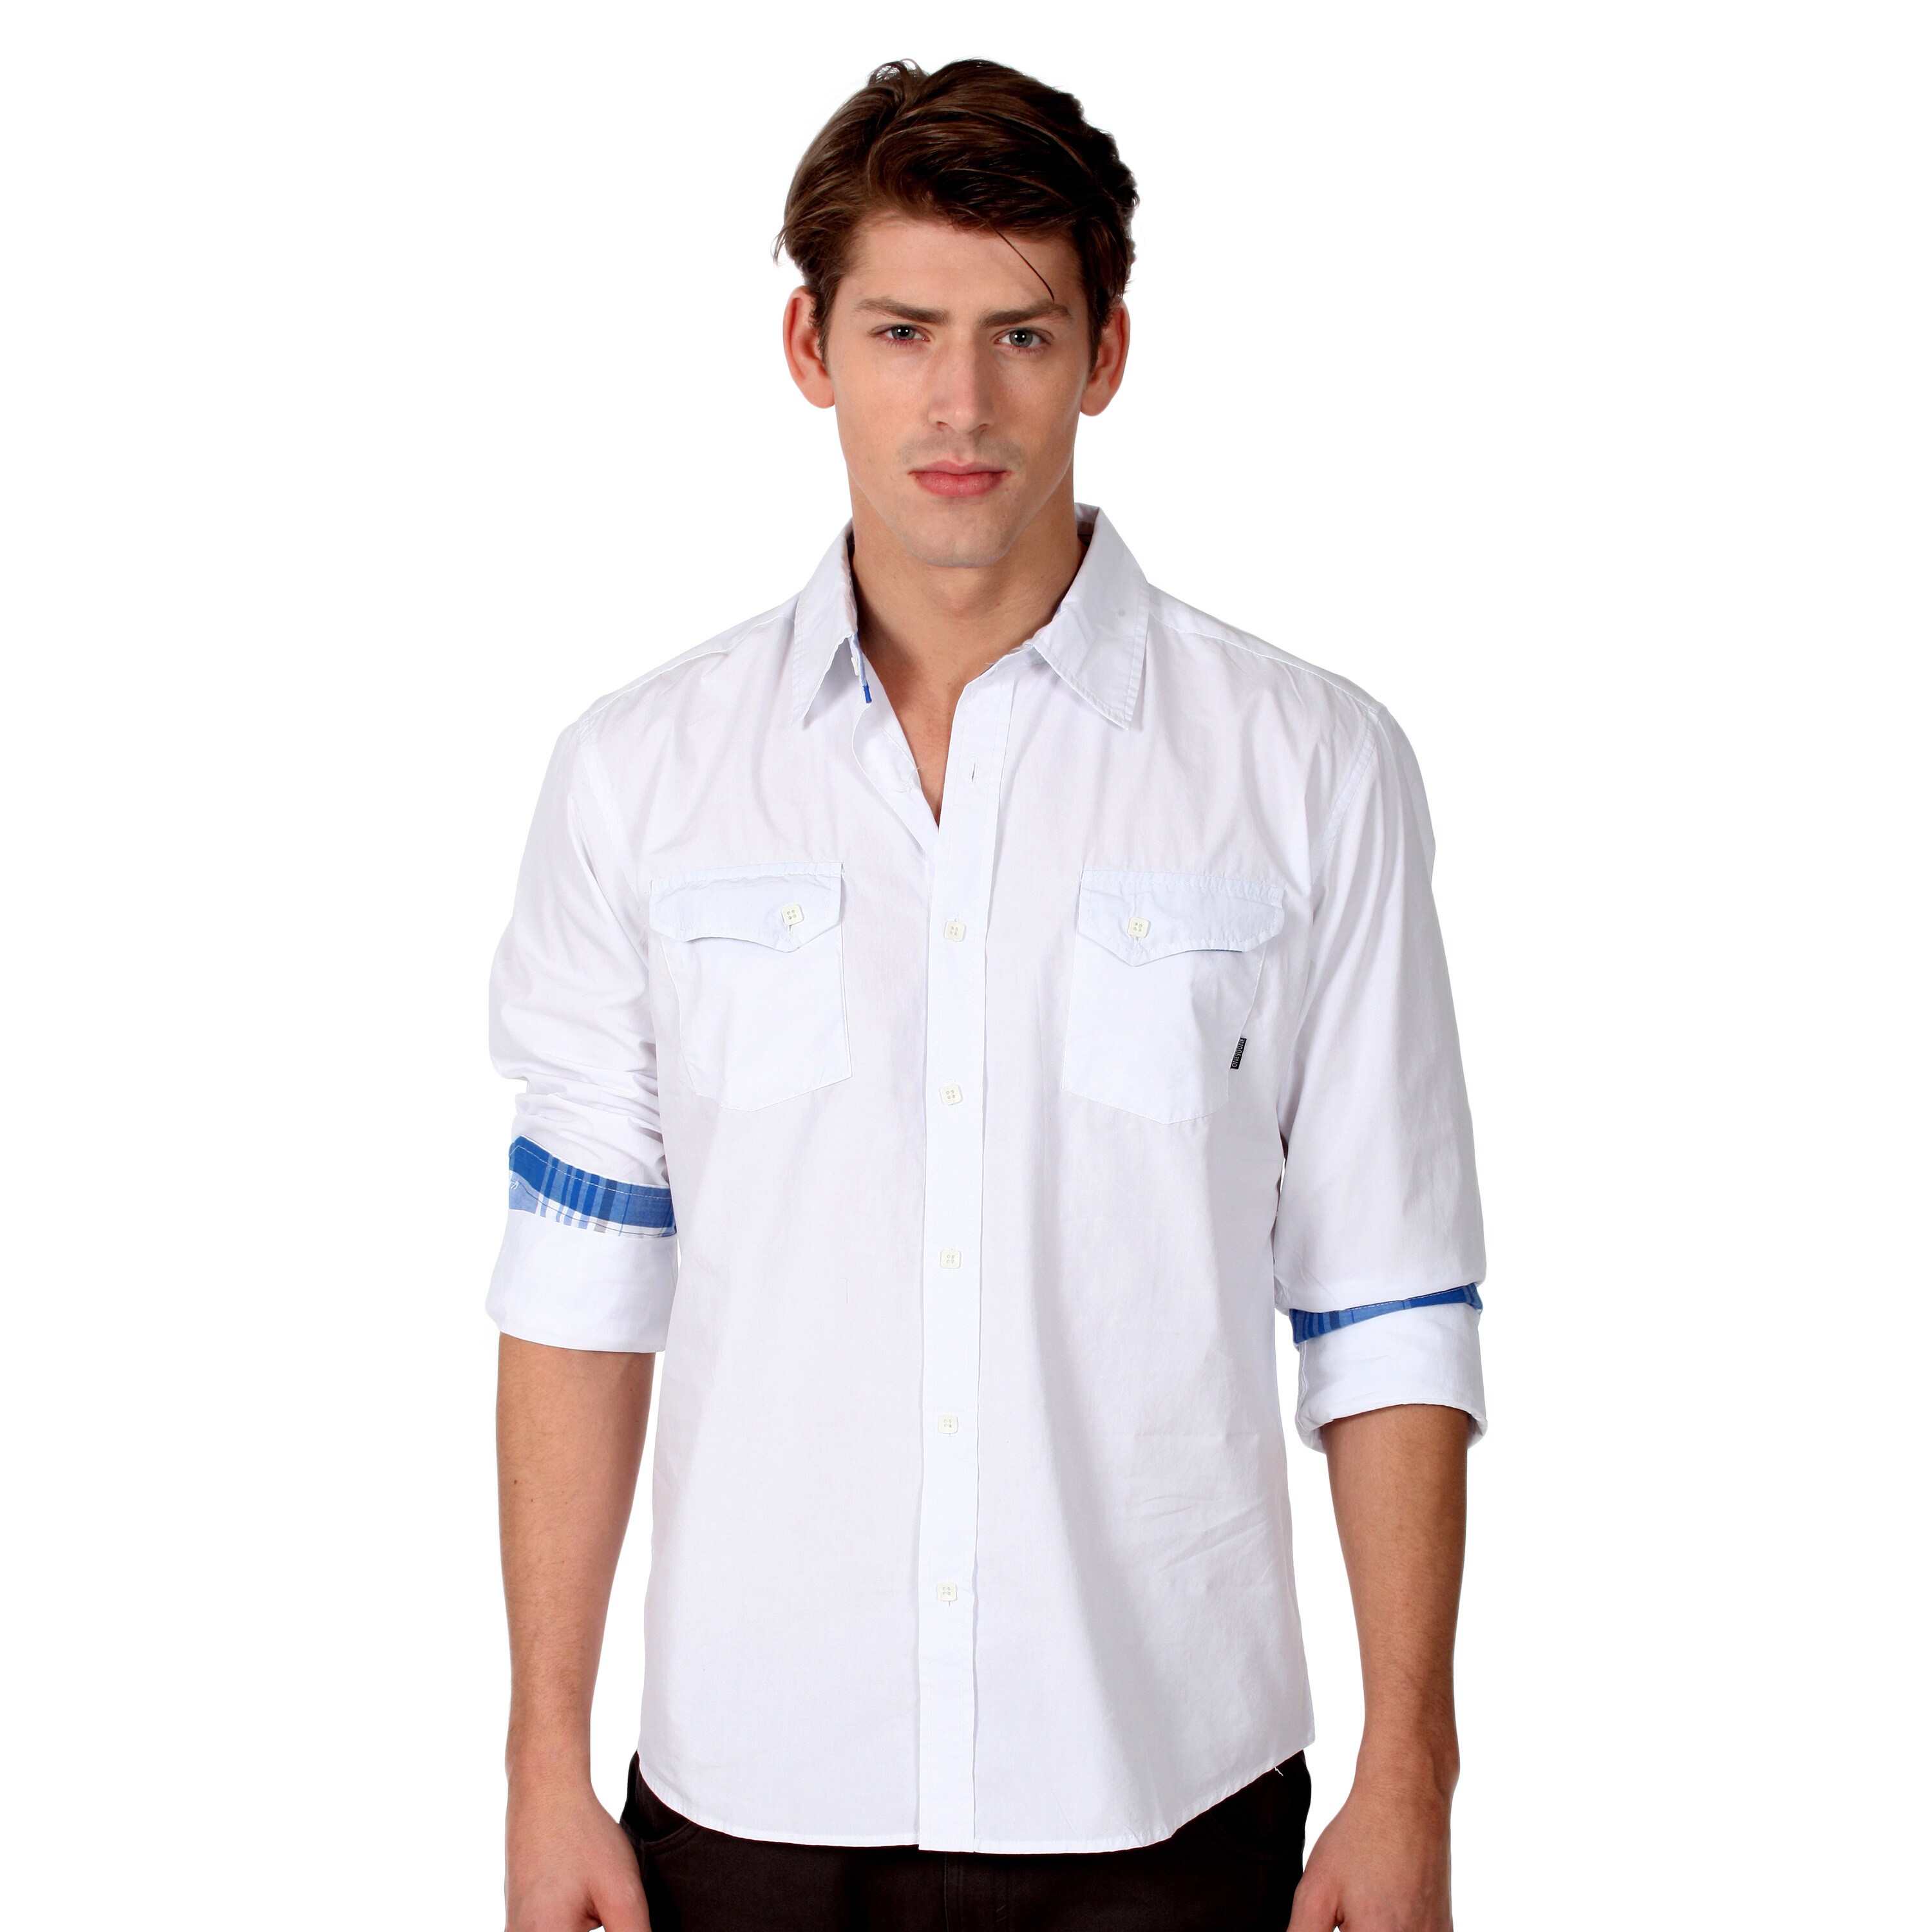 191 Unlimited Mens Slim Fit White Woven Shirt